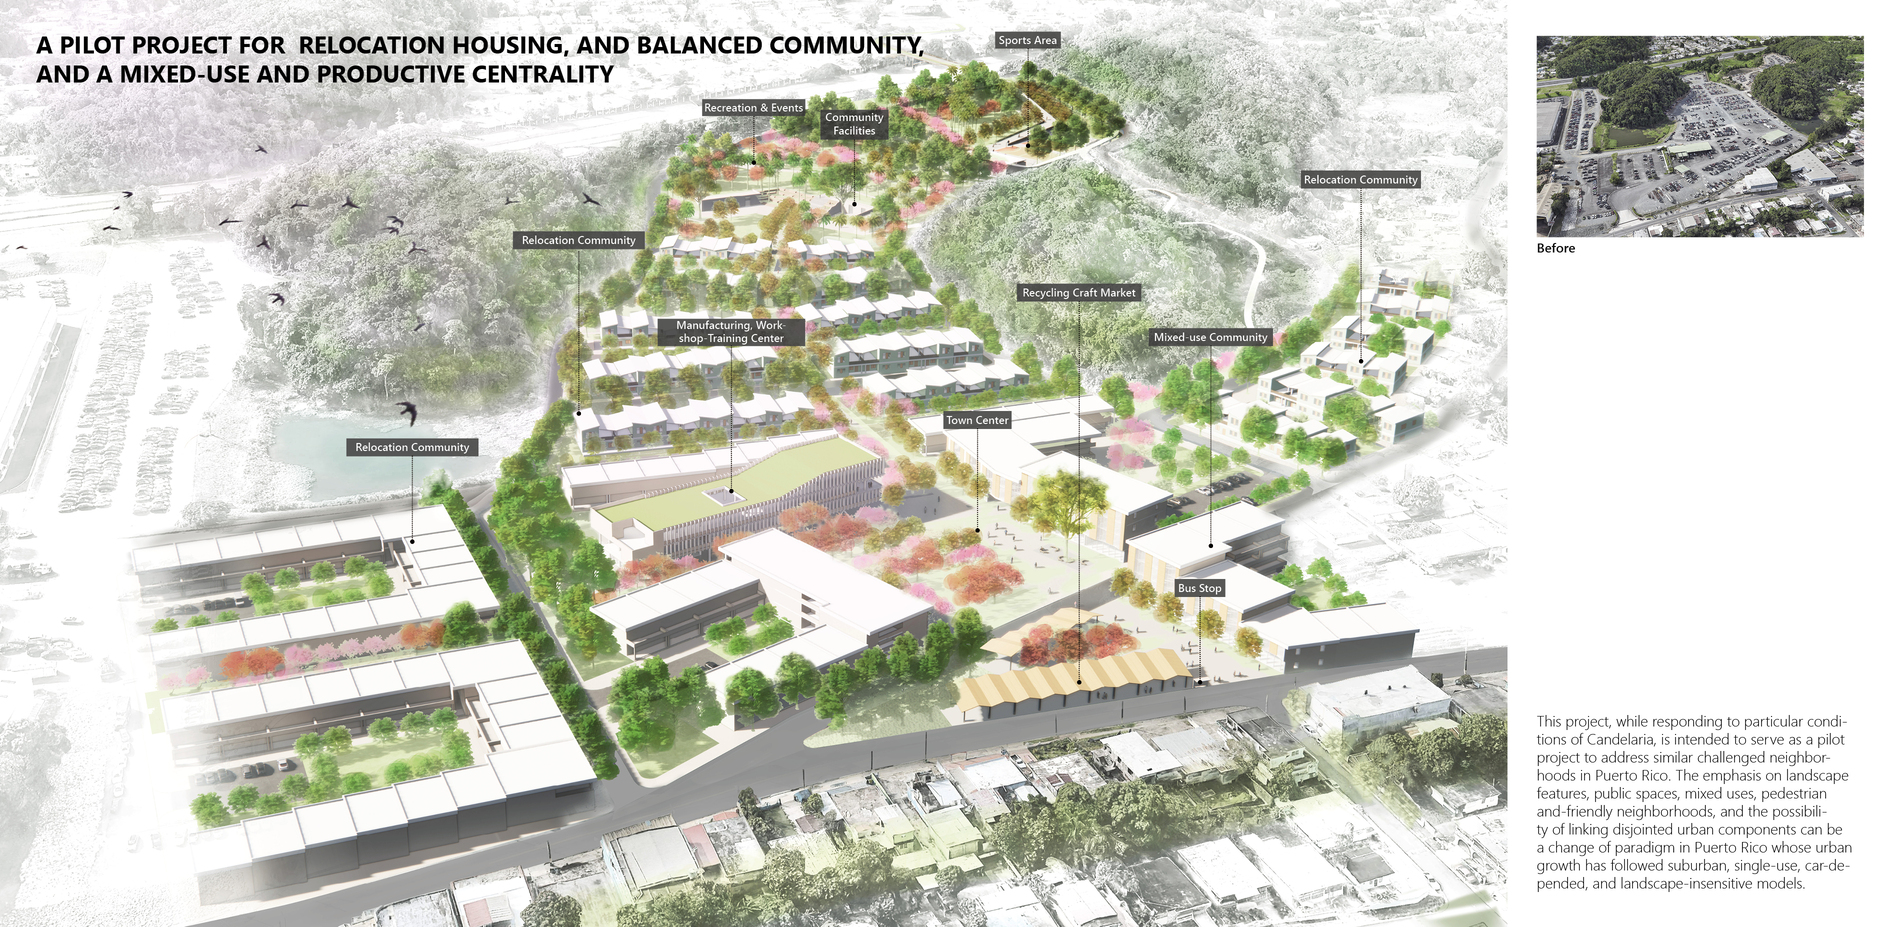 A Pilot Project for Relocation Housing, A Balanced Community, and A Mixed-Use and Productive Centrality